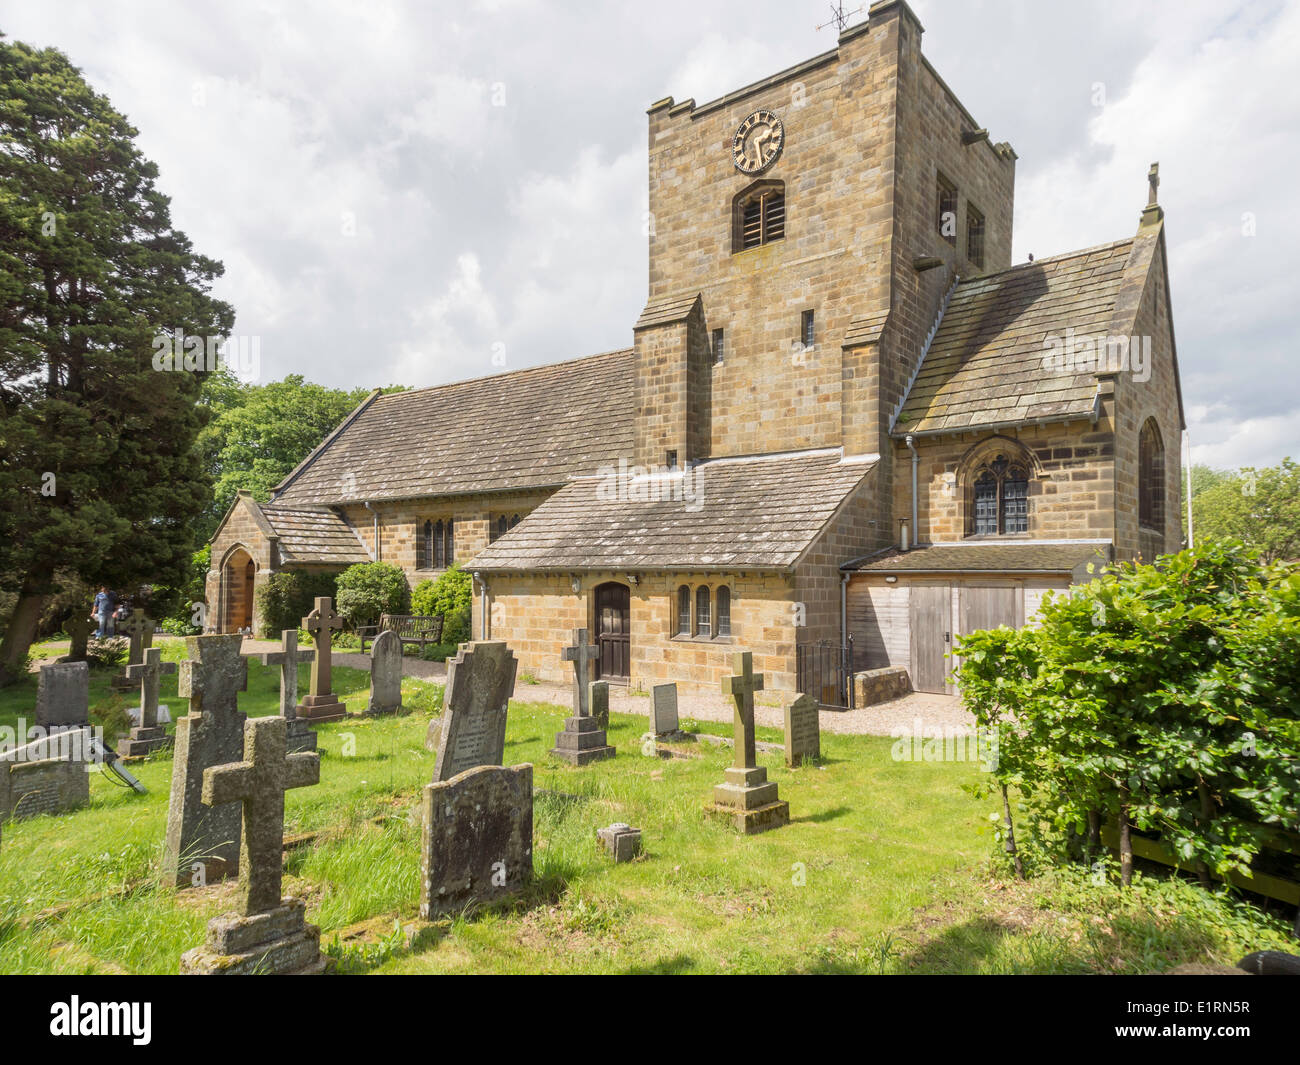 Saint Mary's Church in Goathland North Yorkshire stone built with a square tower Stock Photo